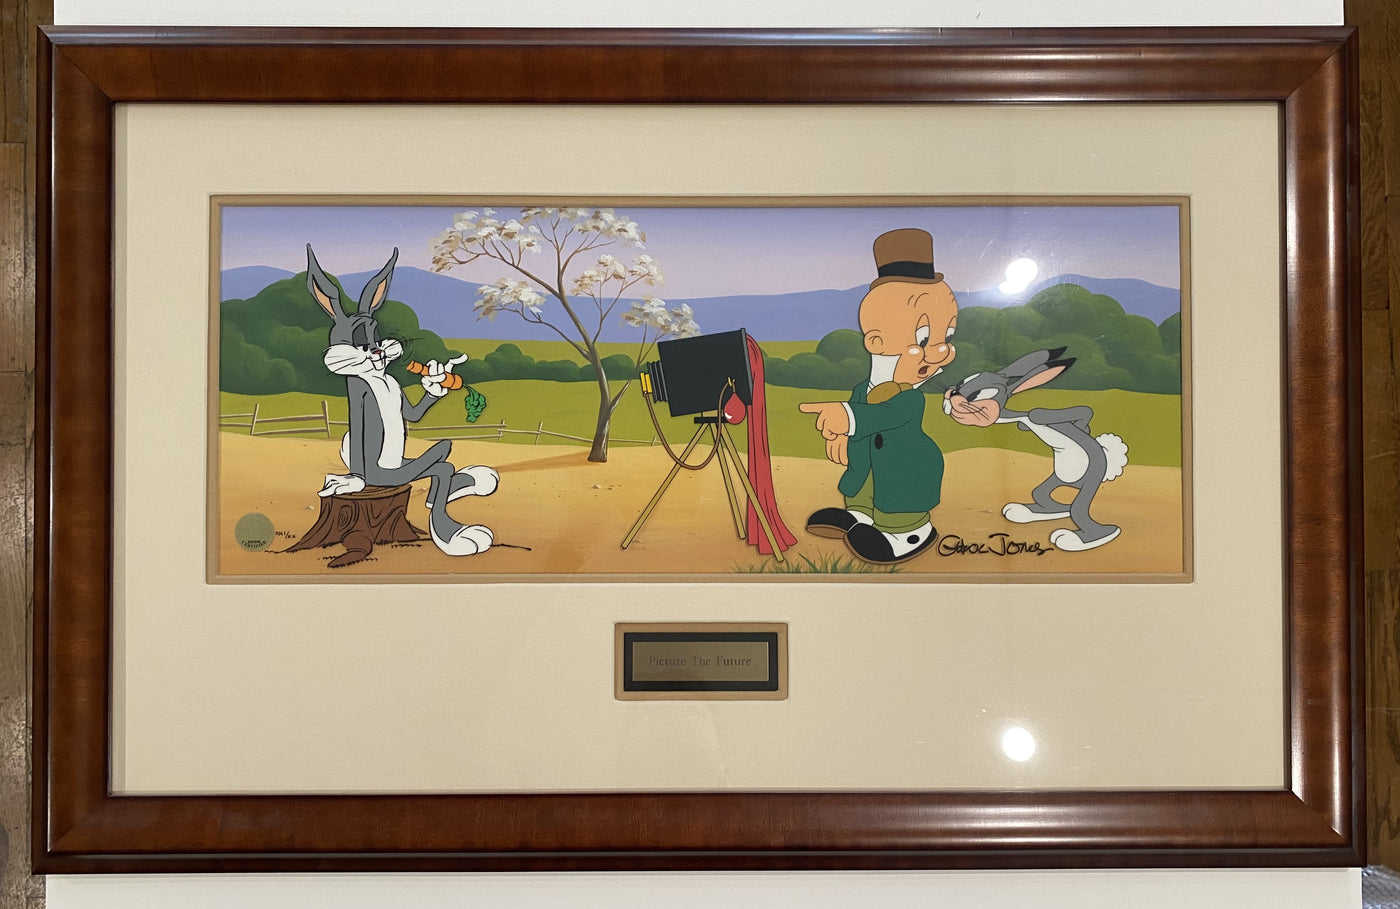 Warner Brothers "Picture the Future" Limited Edition Cel featuring Bugs Bunny and Elmer Fudd